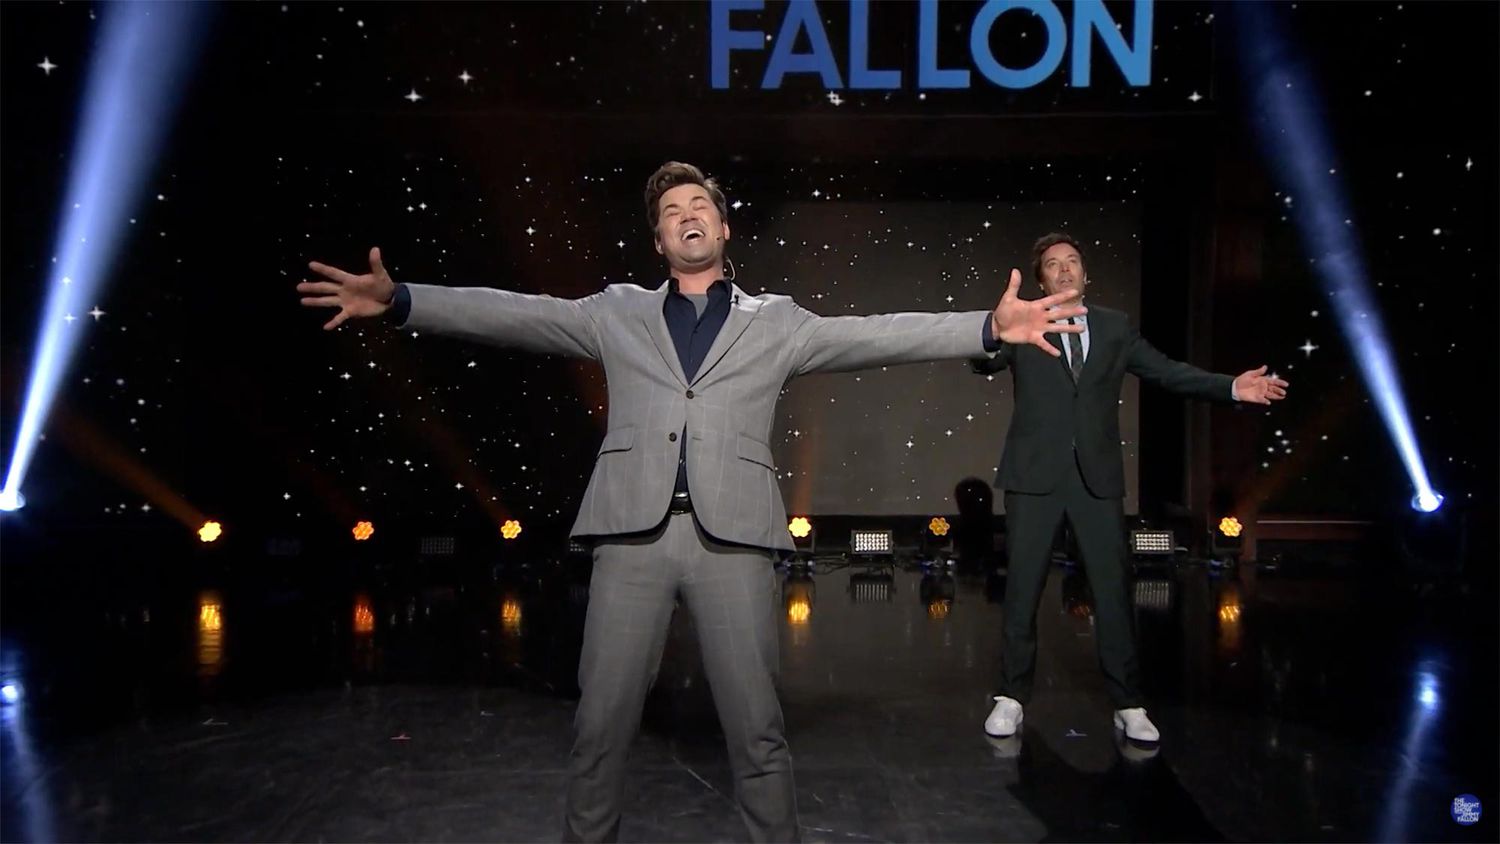 "2020: The Musical" Jimmy Fallon and Andrew Rannells Recap the Year with Broadway Songs